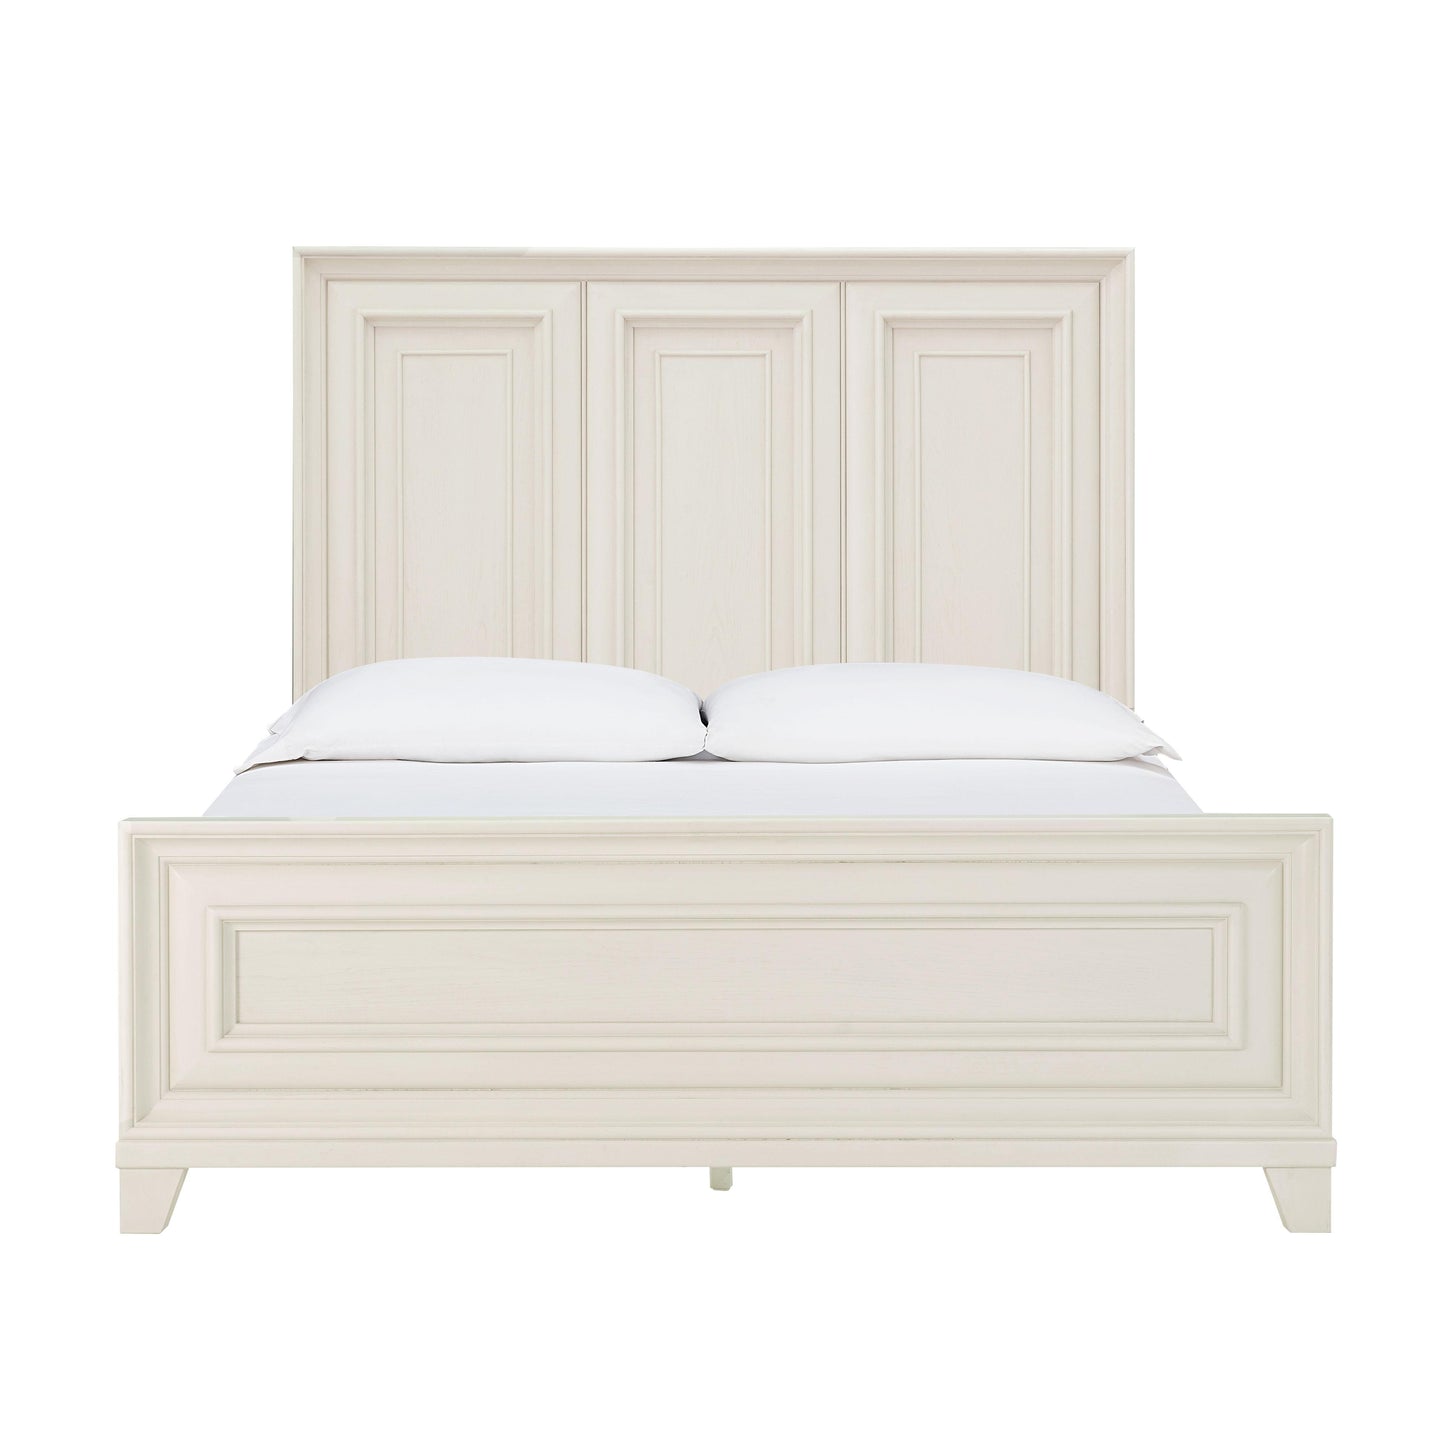 Tov Furniture Montauk Weathered White Queen Panel Bed